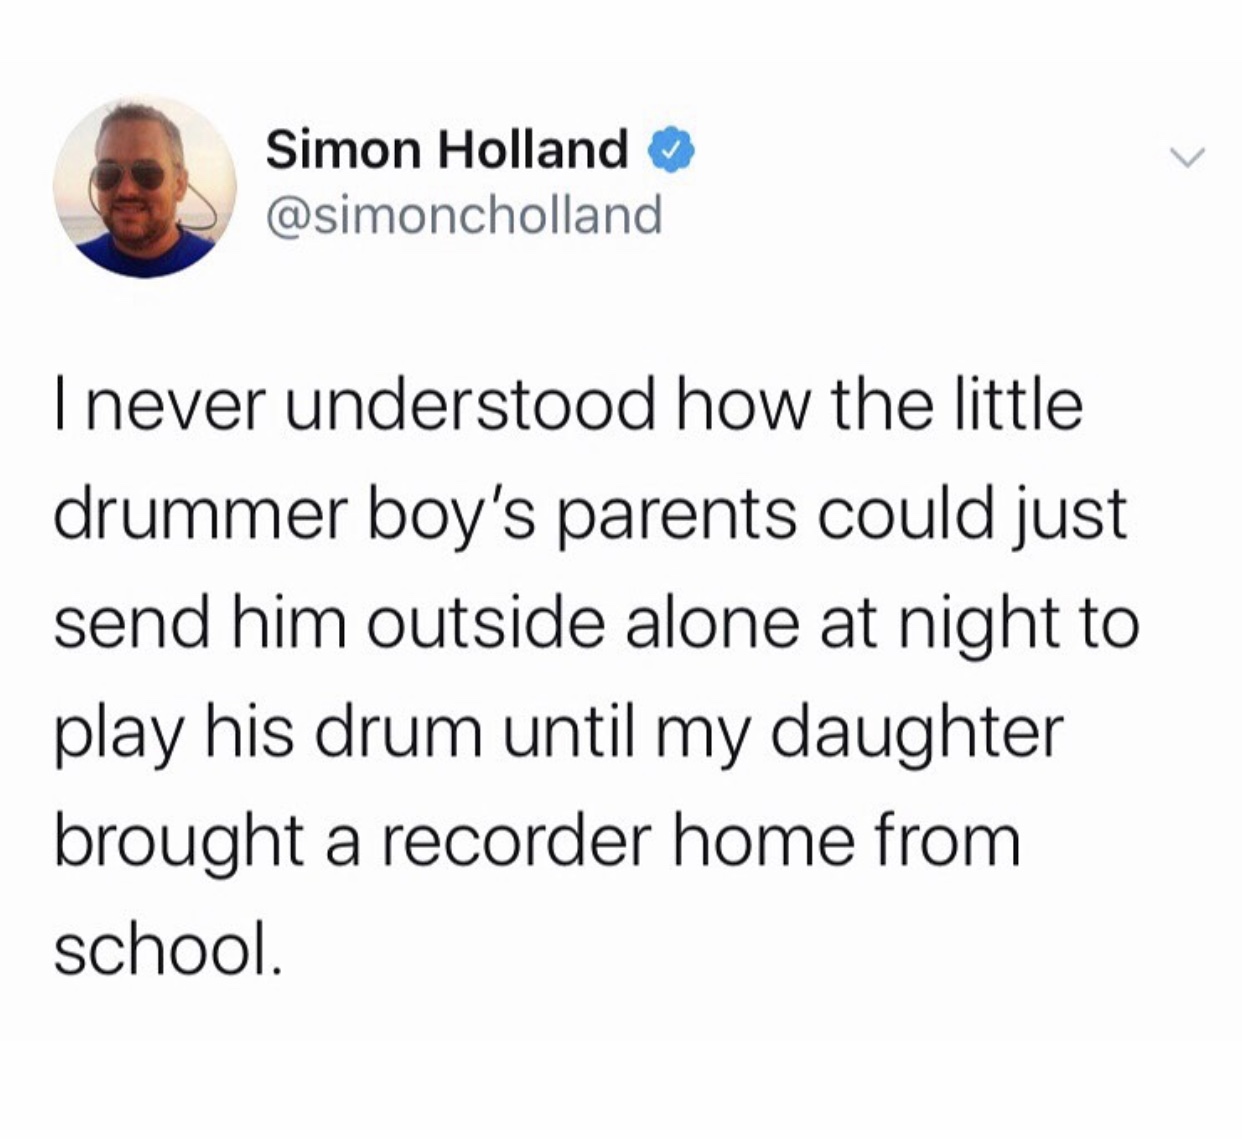 married a stale ham sandwich - Simon Holland I never understood how the little drummer boy's parents could just send him outside alone at night to play his drum until my daughter brought a recorder home from school.